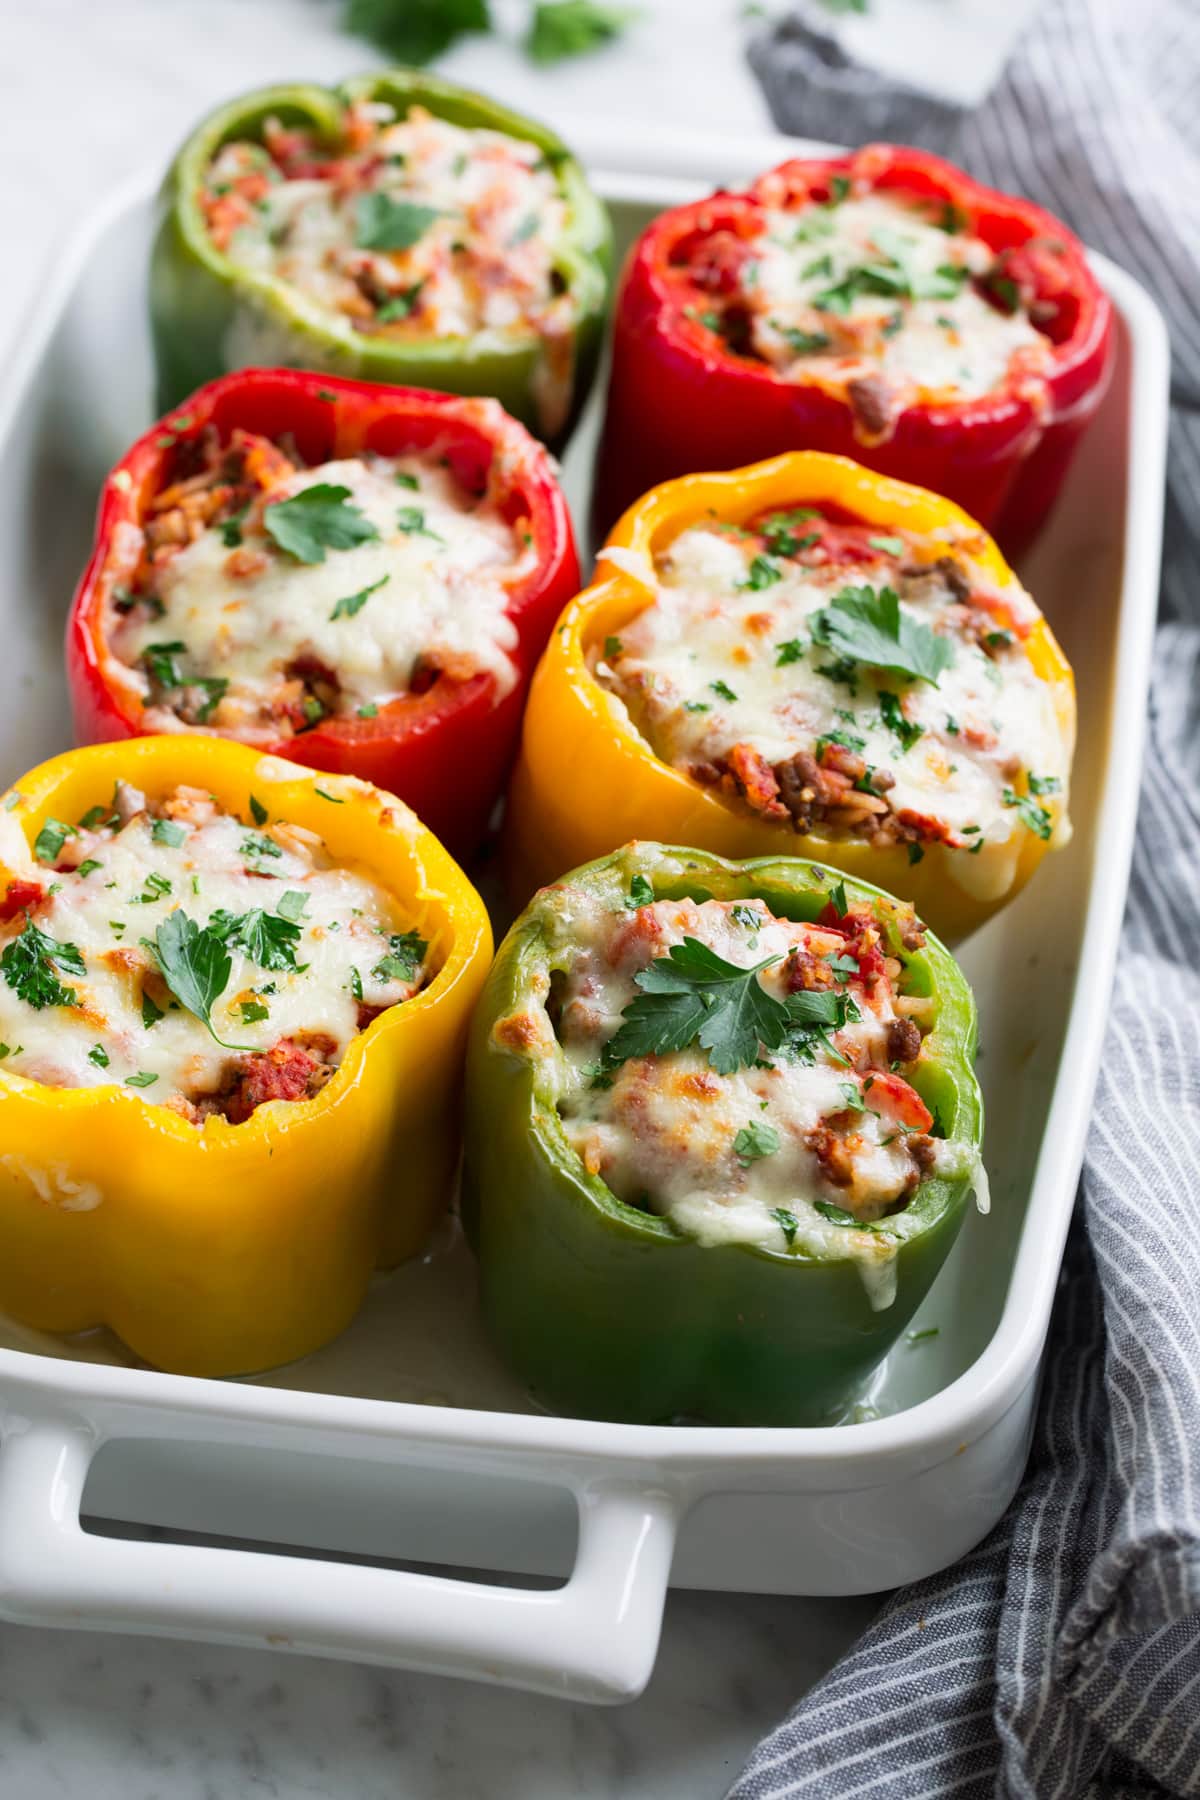 Stuffed Peppers Recipe Cooking Classy,Types Of Birch Trees In Wisconsin